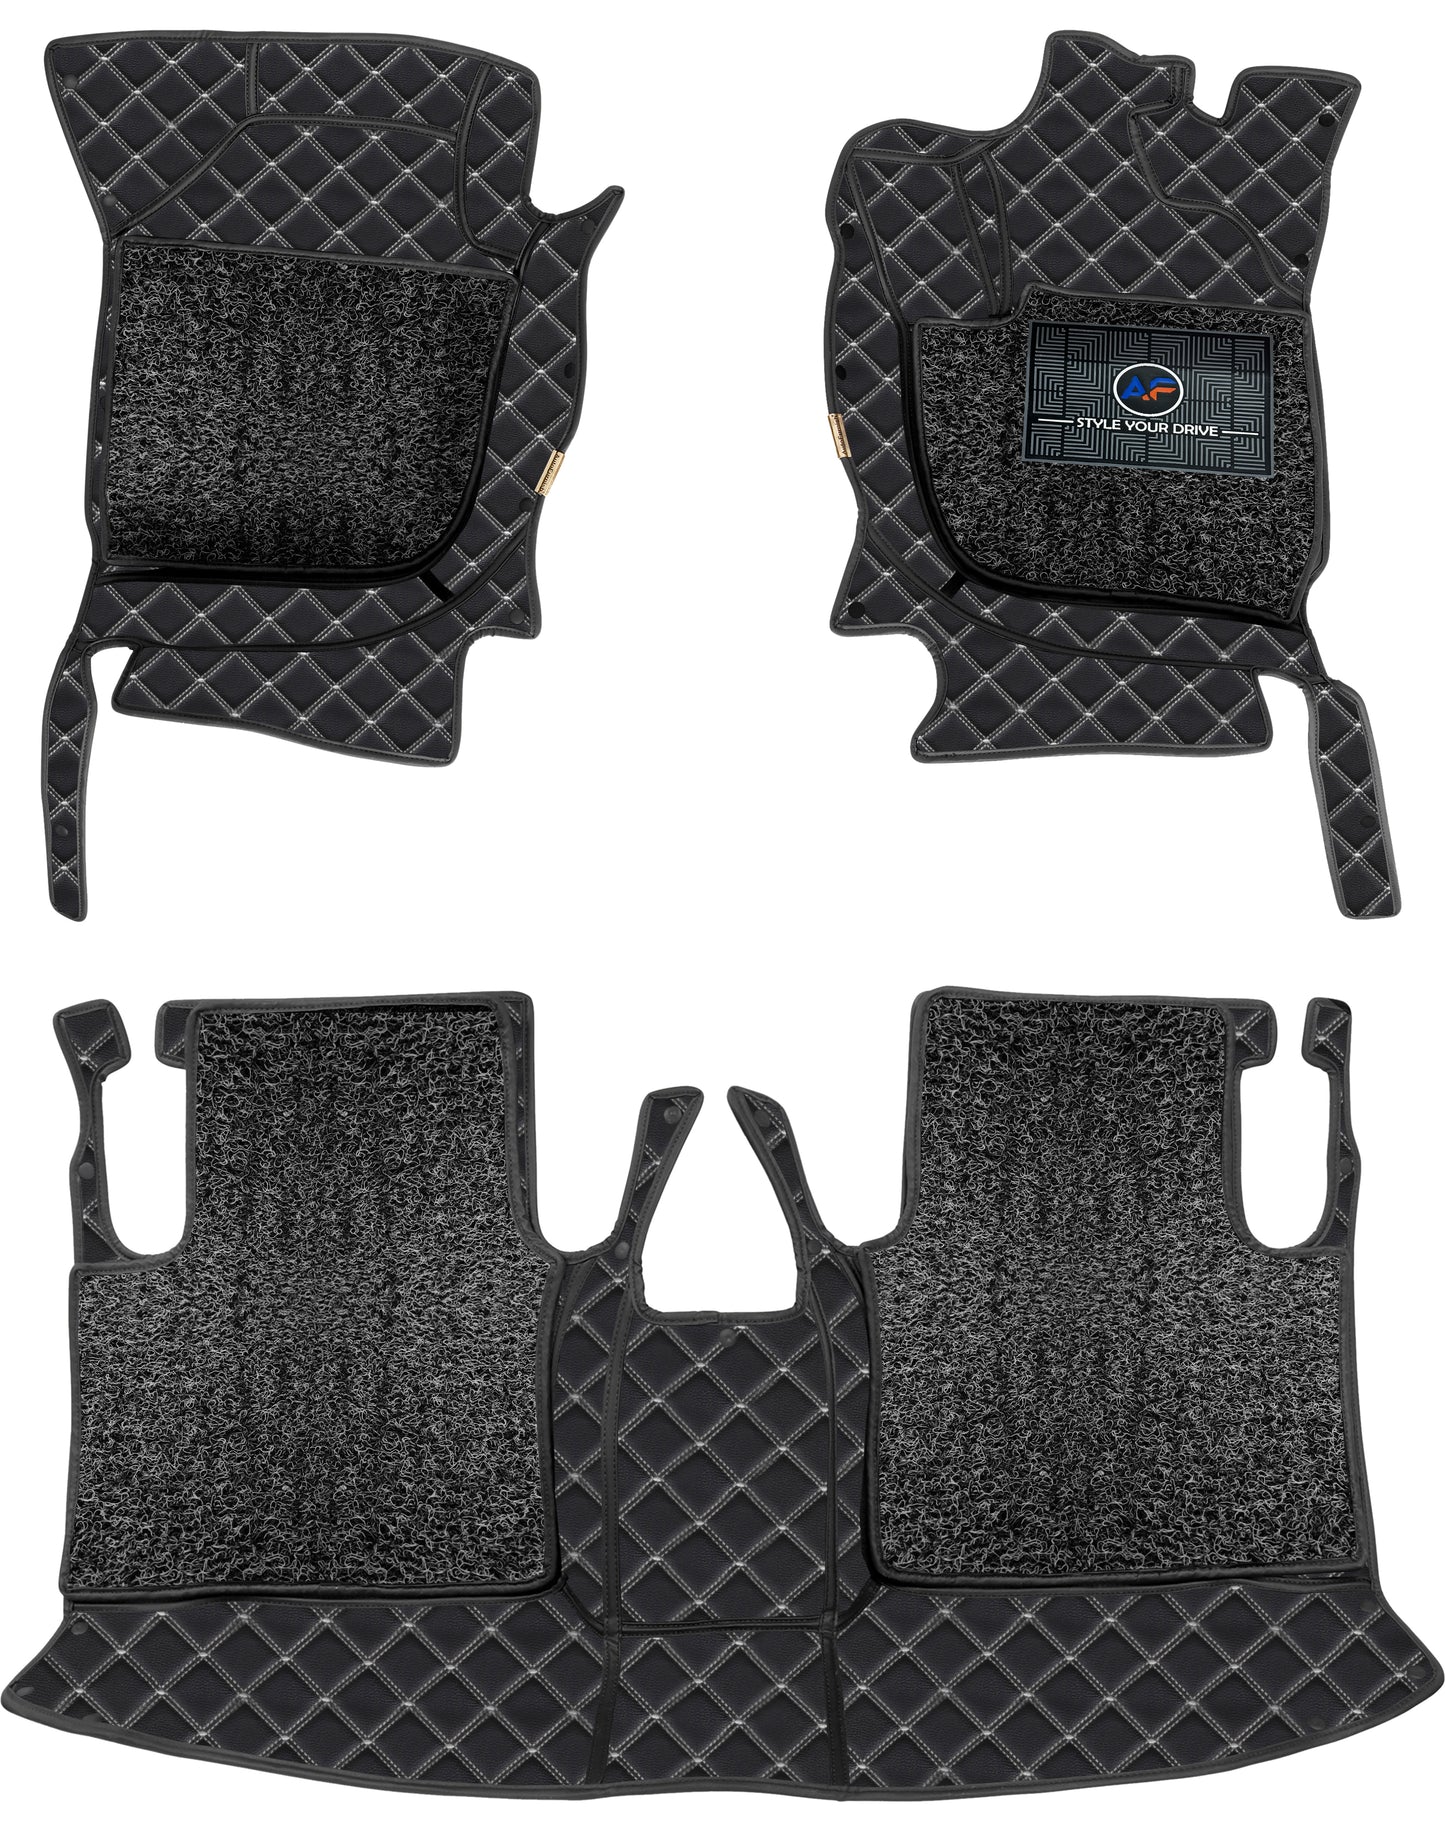 Hyundai Xcent 2016 7D Luxury Car Mat, All Weather Proof, Anti-Skid, 100% Waterproof & Odorless with Unique Diamond Fish Design (24mm Luxury PU Leather, 2 Rows)